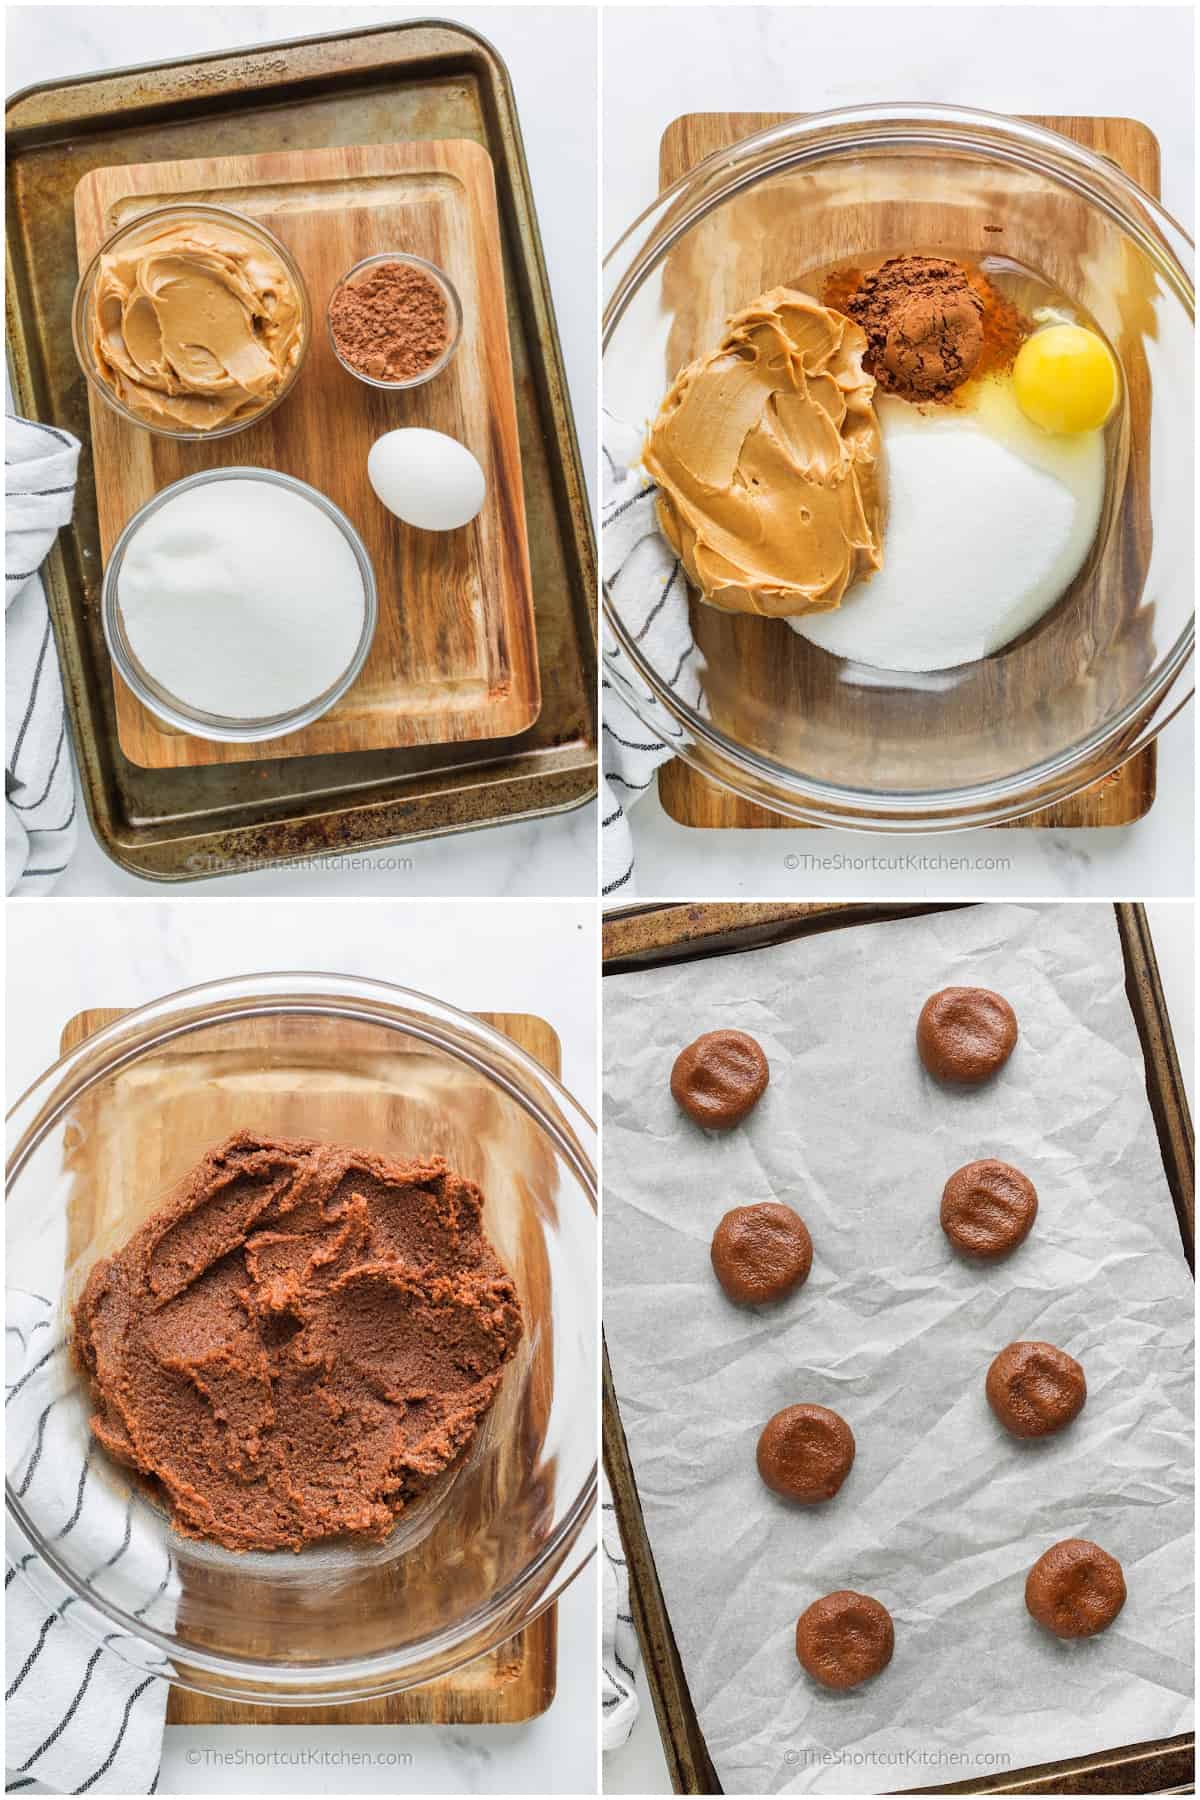 ingredients and process to make chocolate peanut butter cookies